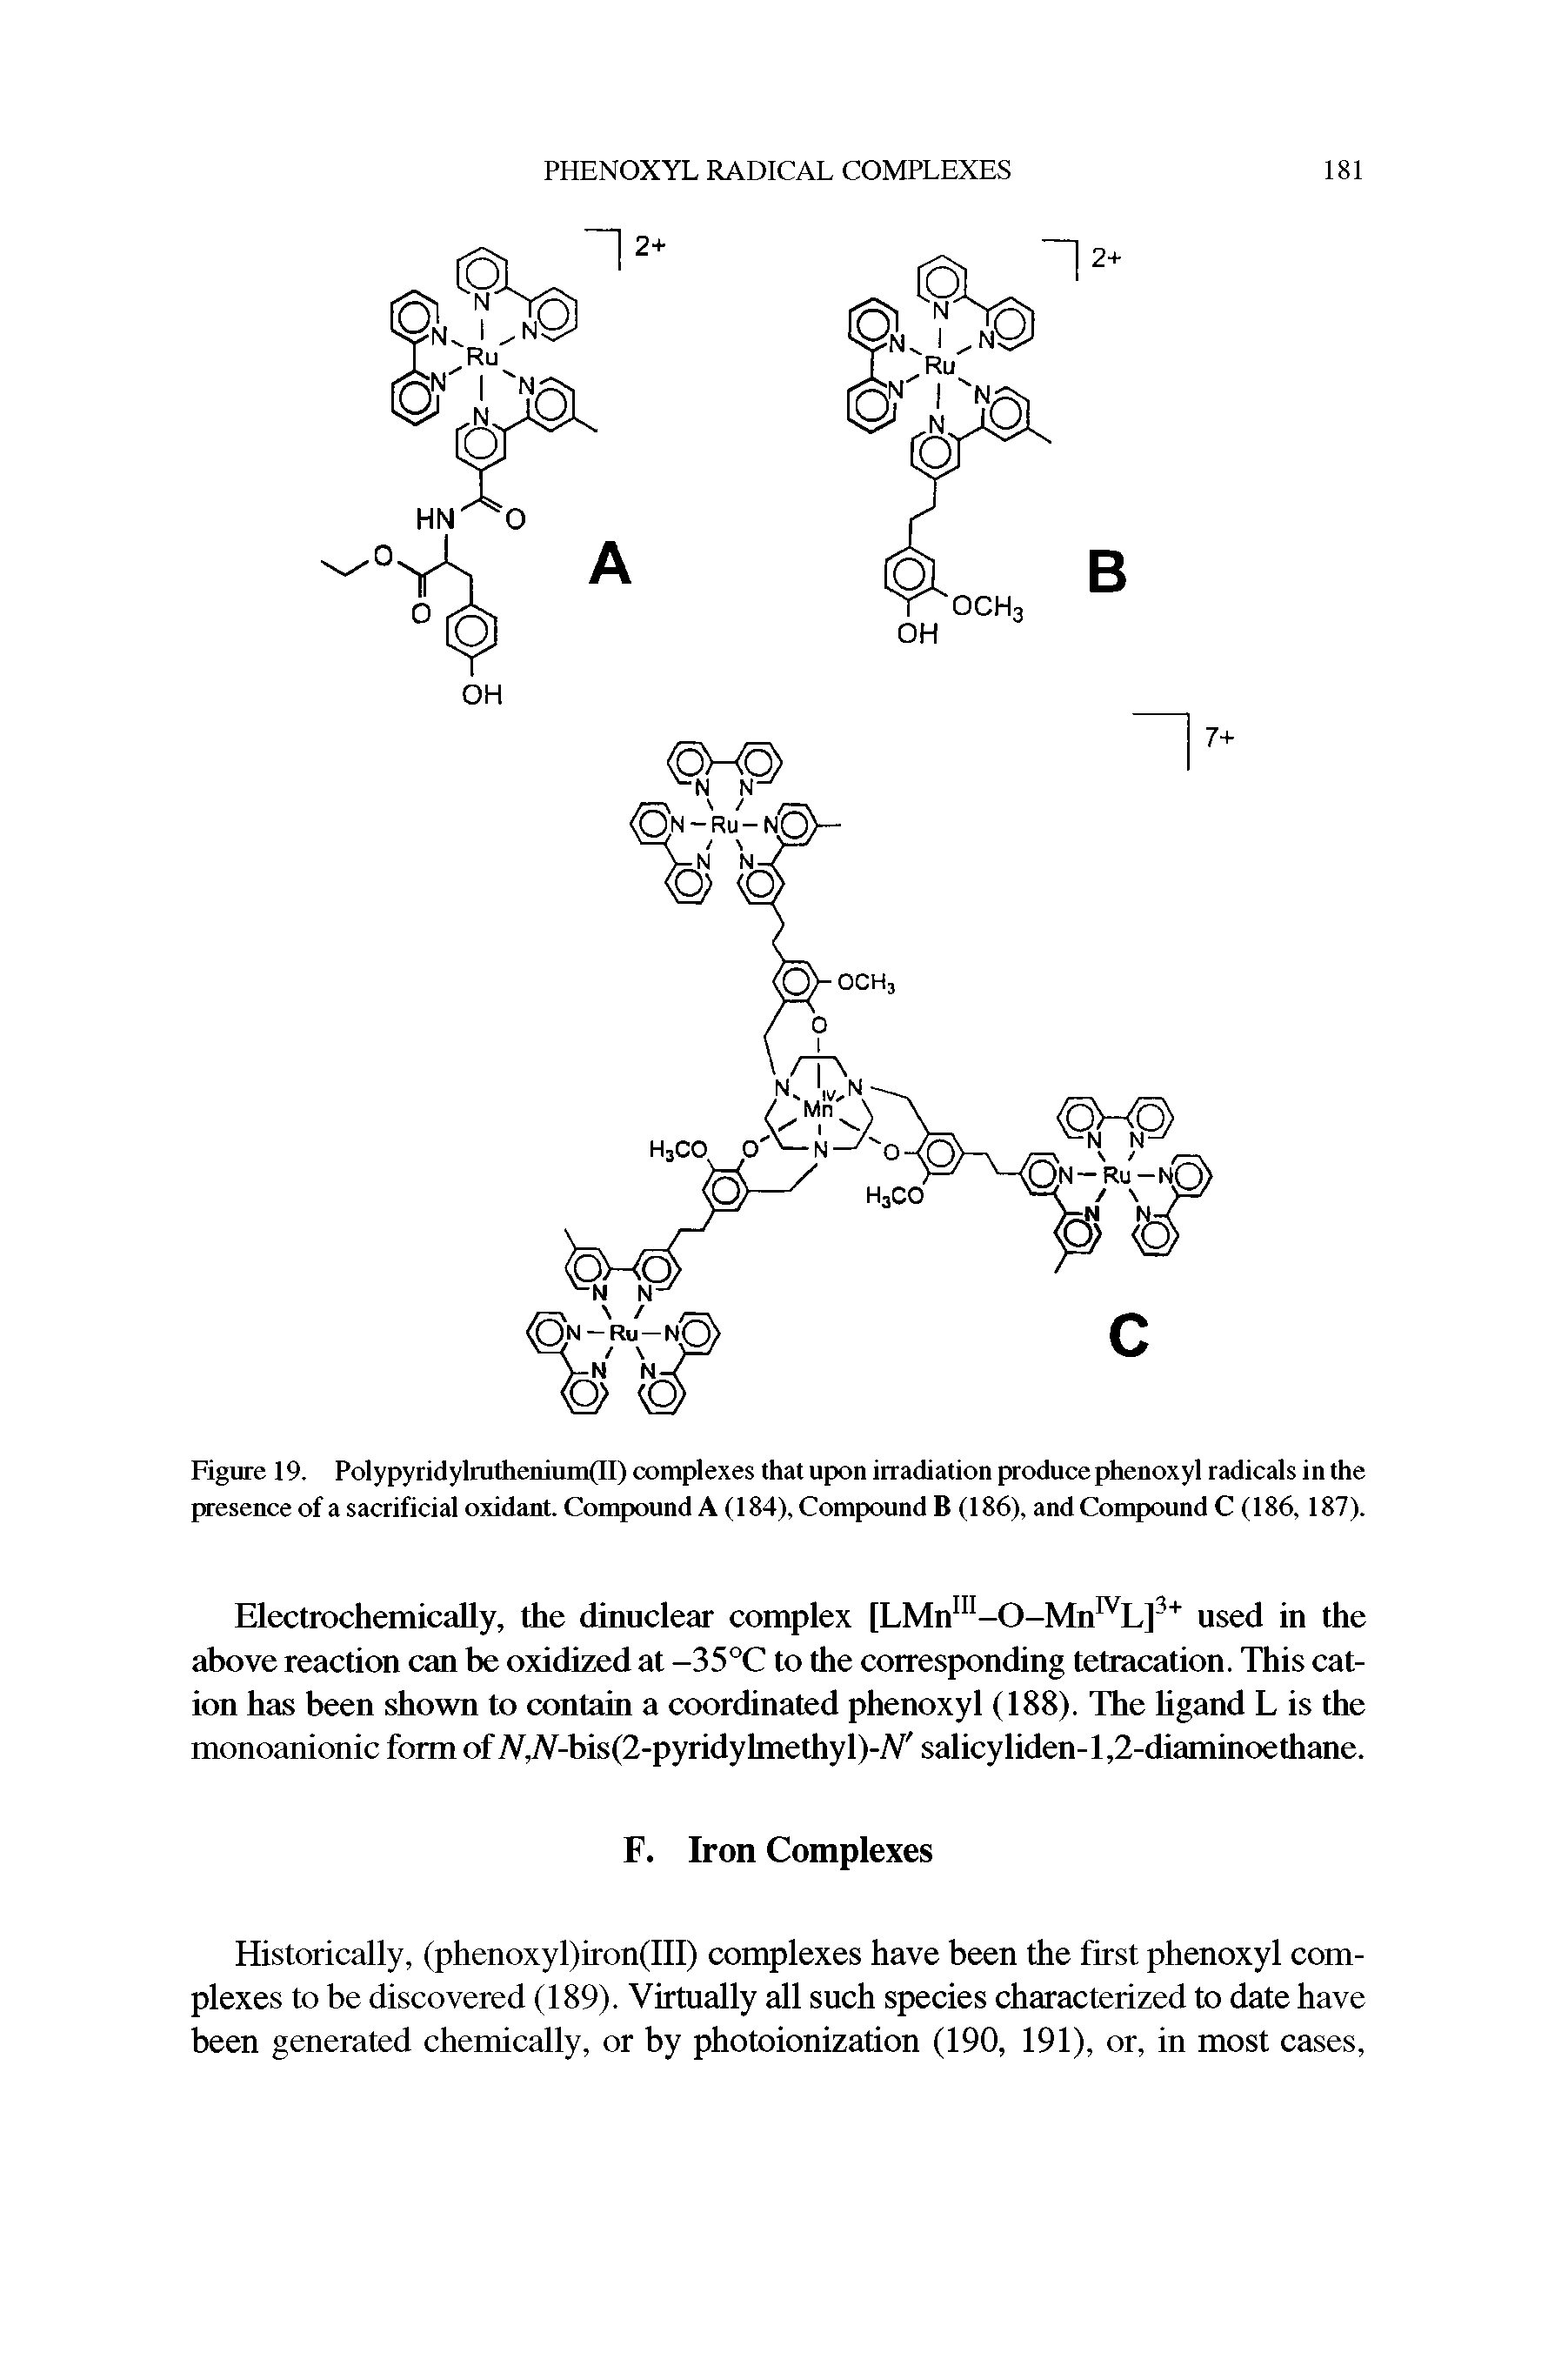 Figure 19. Polypyridylruthenium(II) complexes that upon irradiation producephenoxyl radicals in the presence of a sacrificial oxidant. Compound A (184), Compound B (186), and Compound C (186, 187).